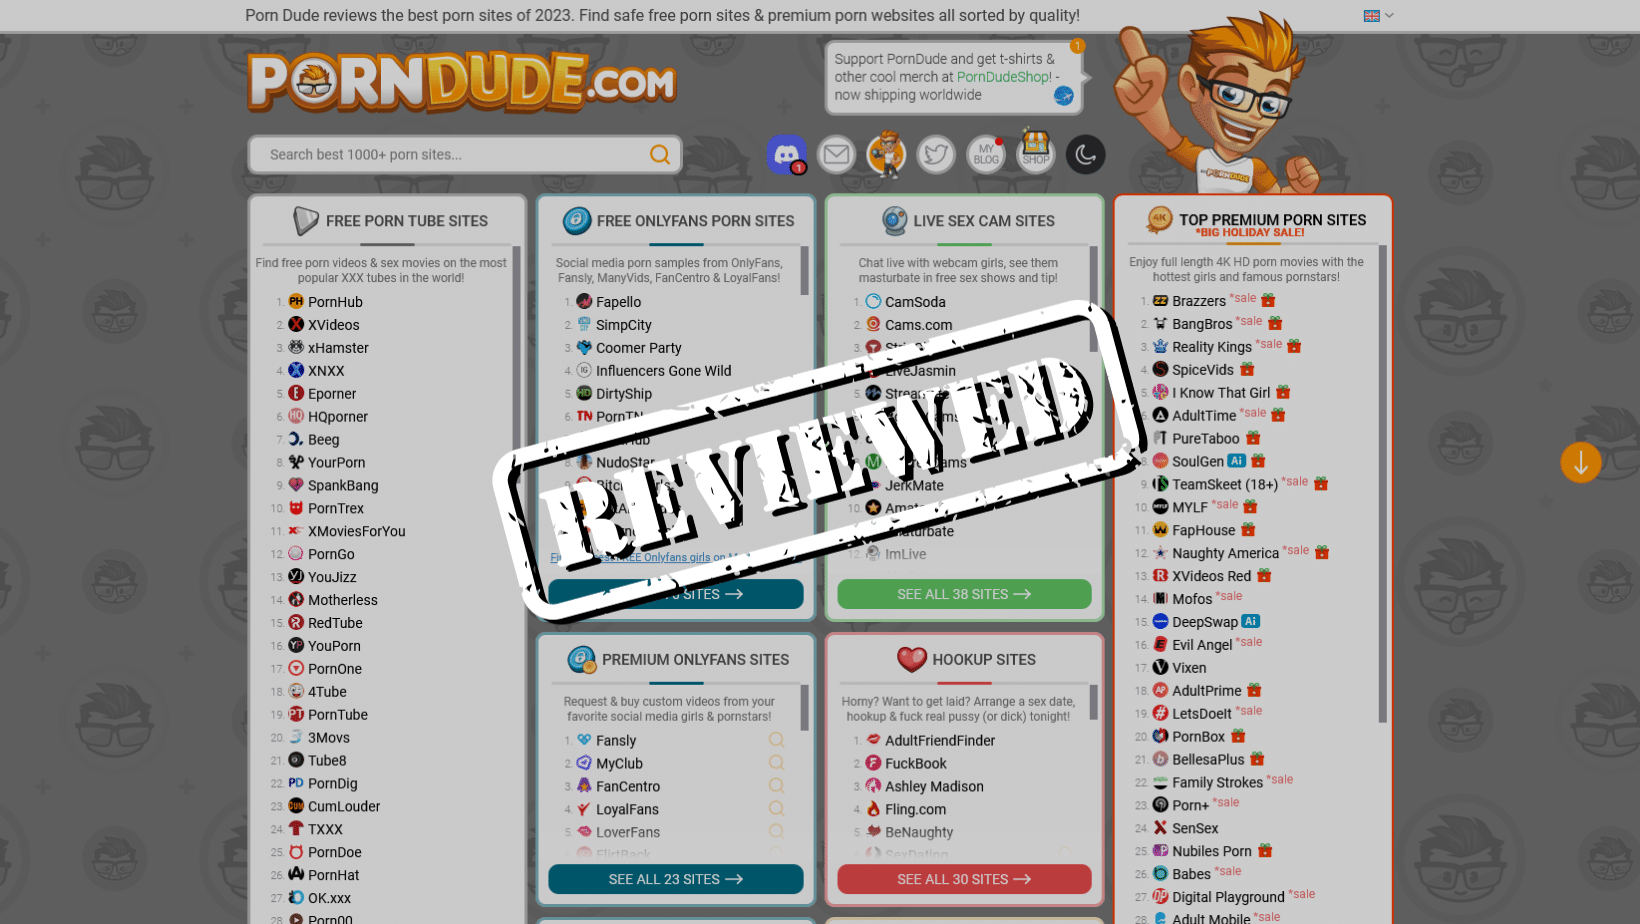 ThePornDude Review – Find the Best Porn Sites in the World!